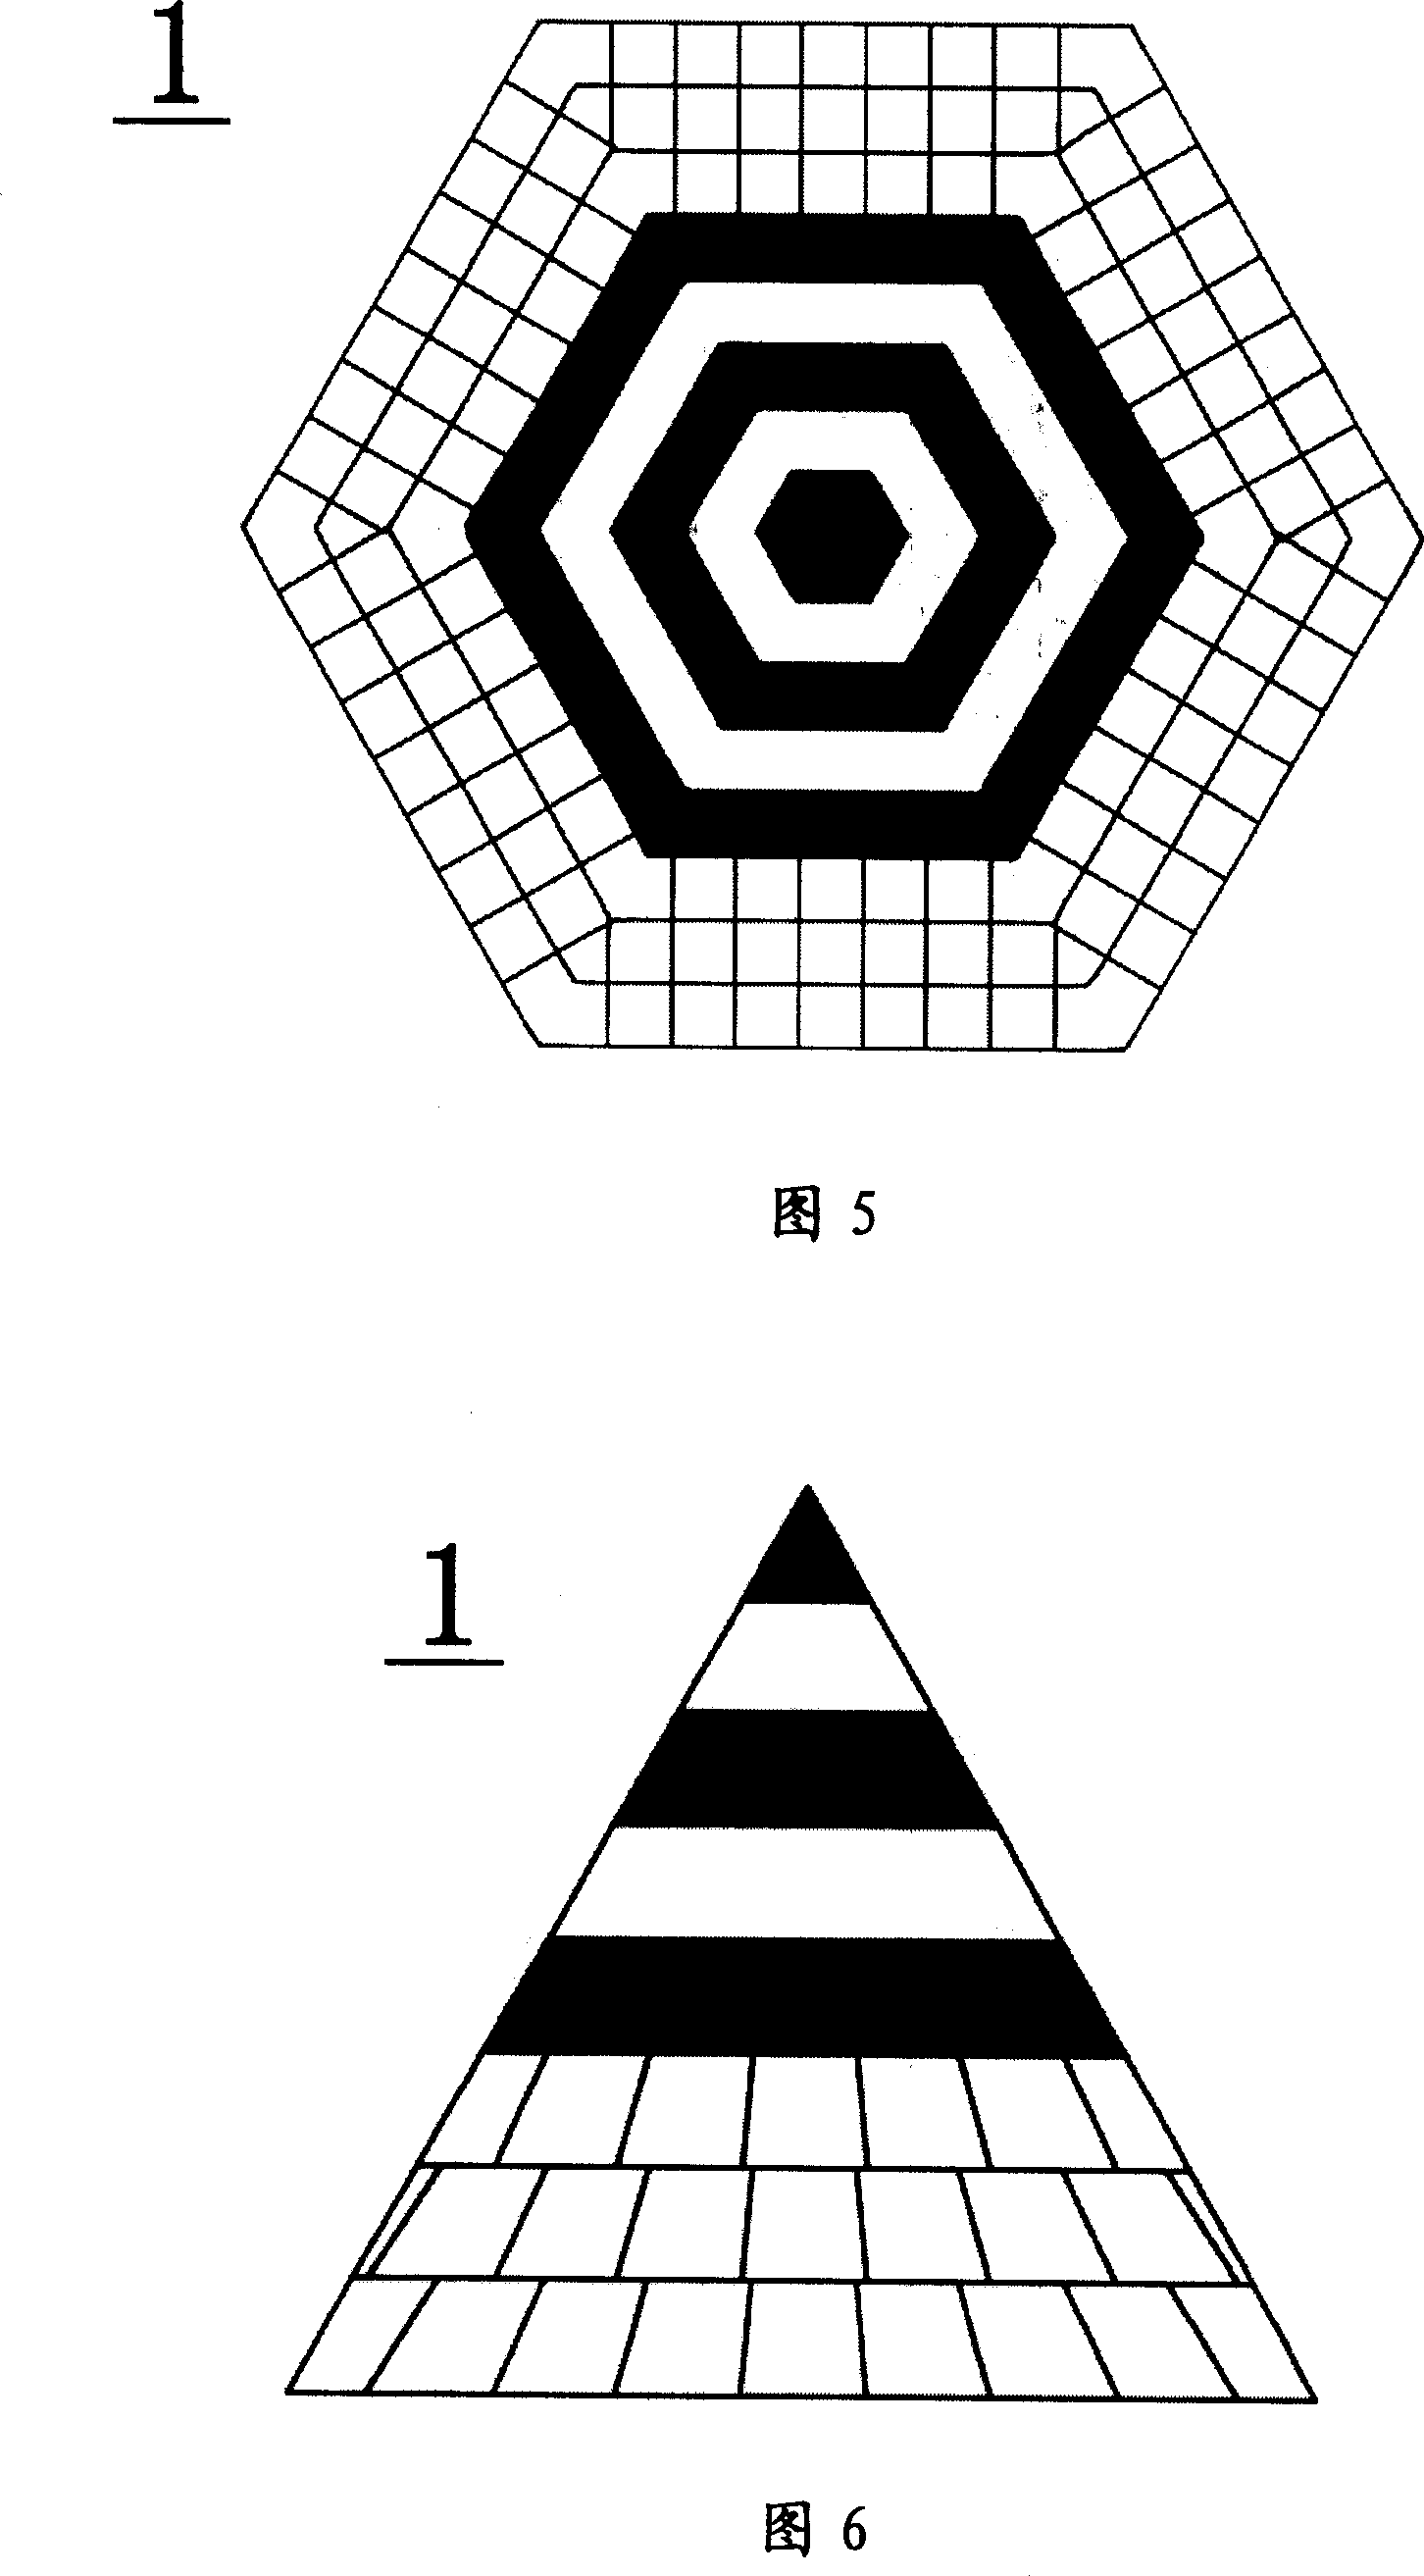 Efficient information lattice image and its generation and decoding method